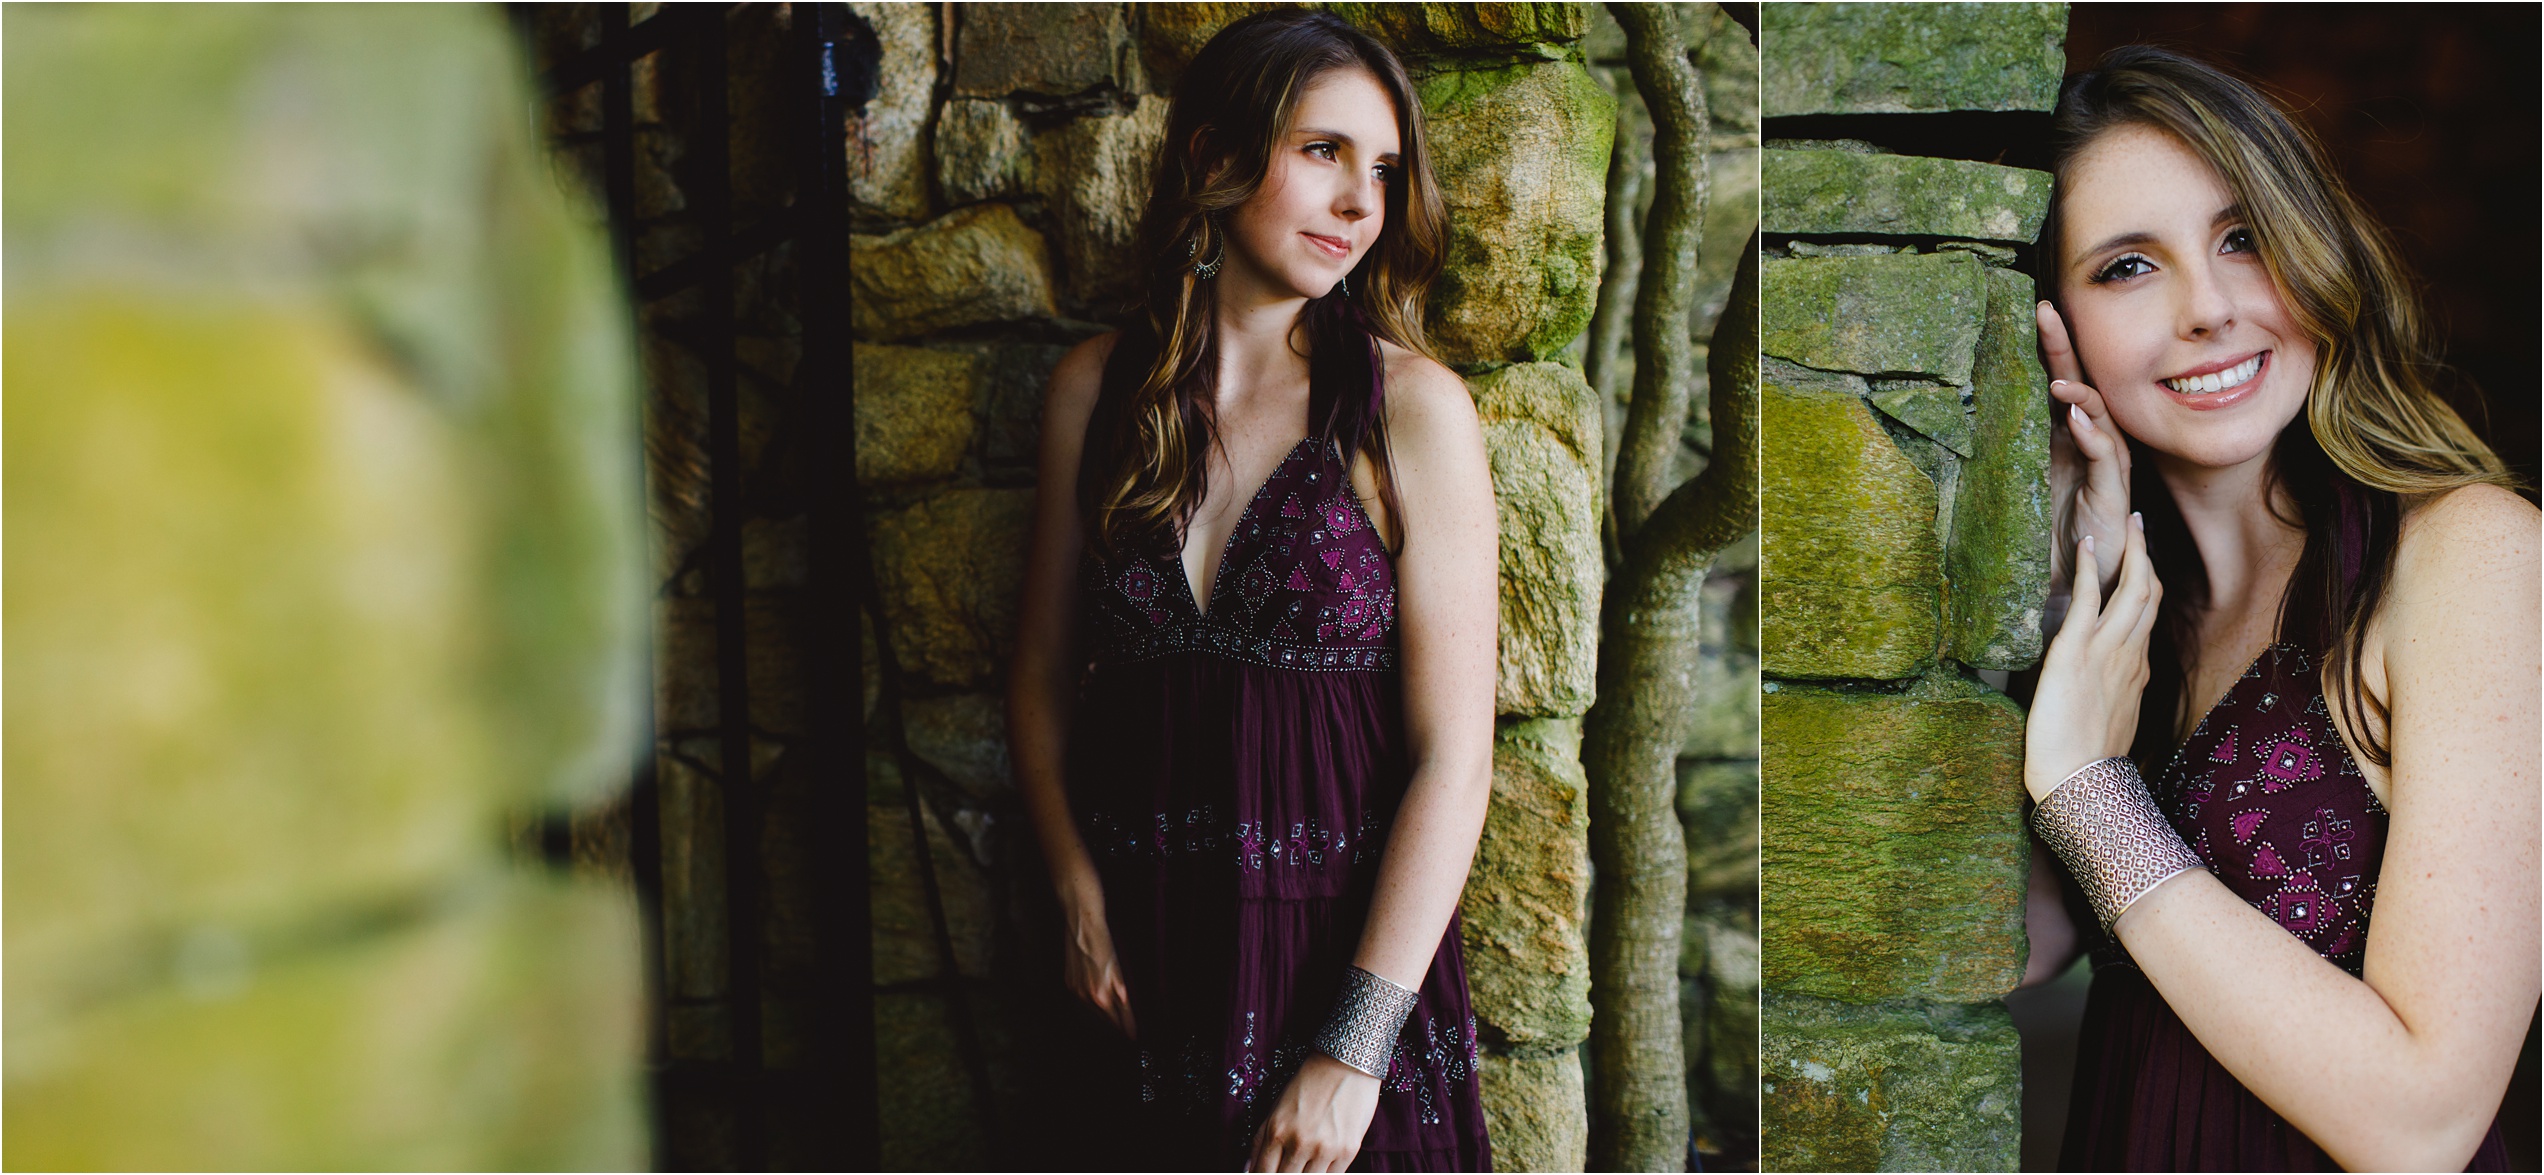 Clare poses against moss covered stone castle walls at Longwood gardens in Pennsylvania Senior Photoshoot.